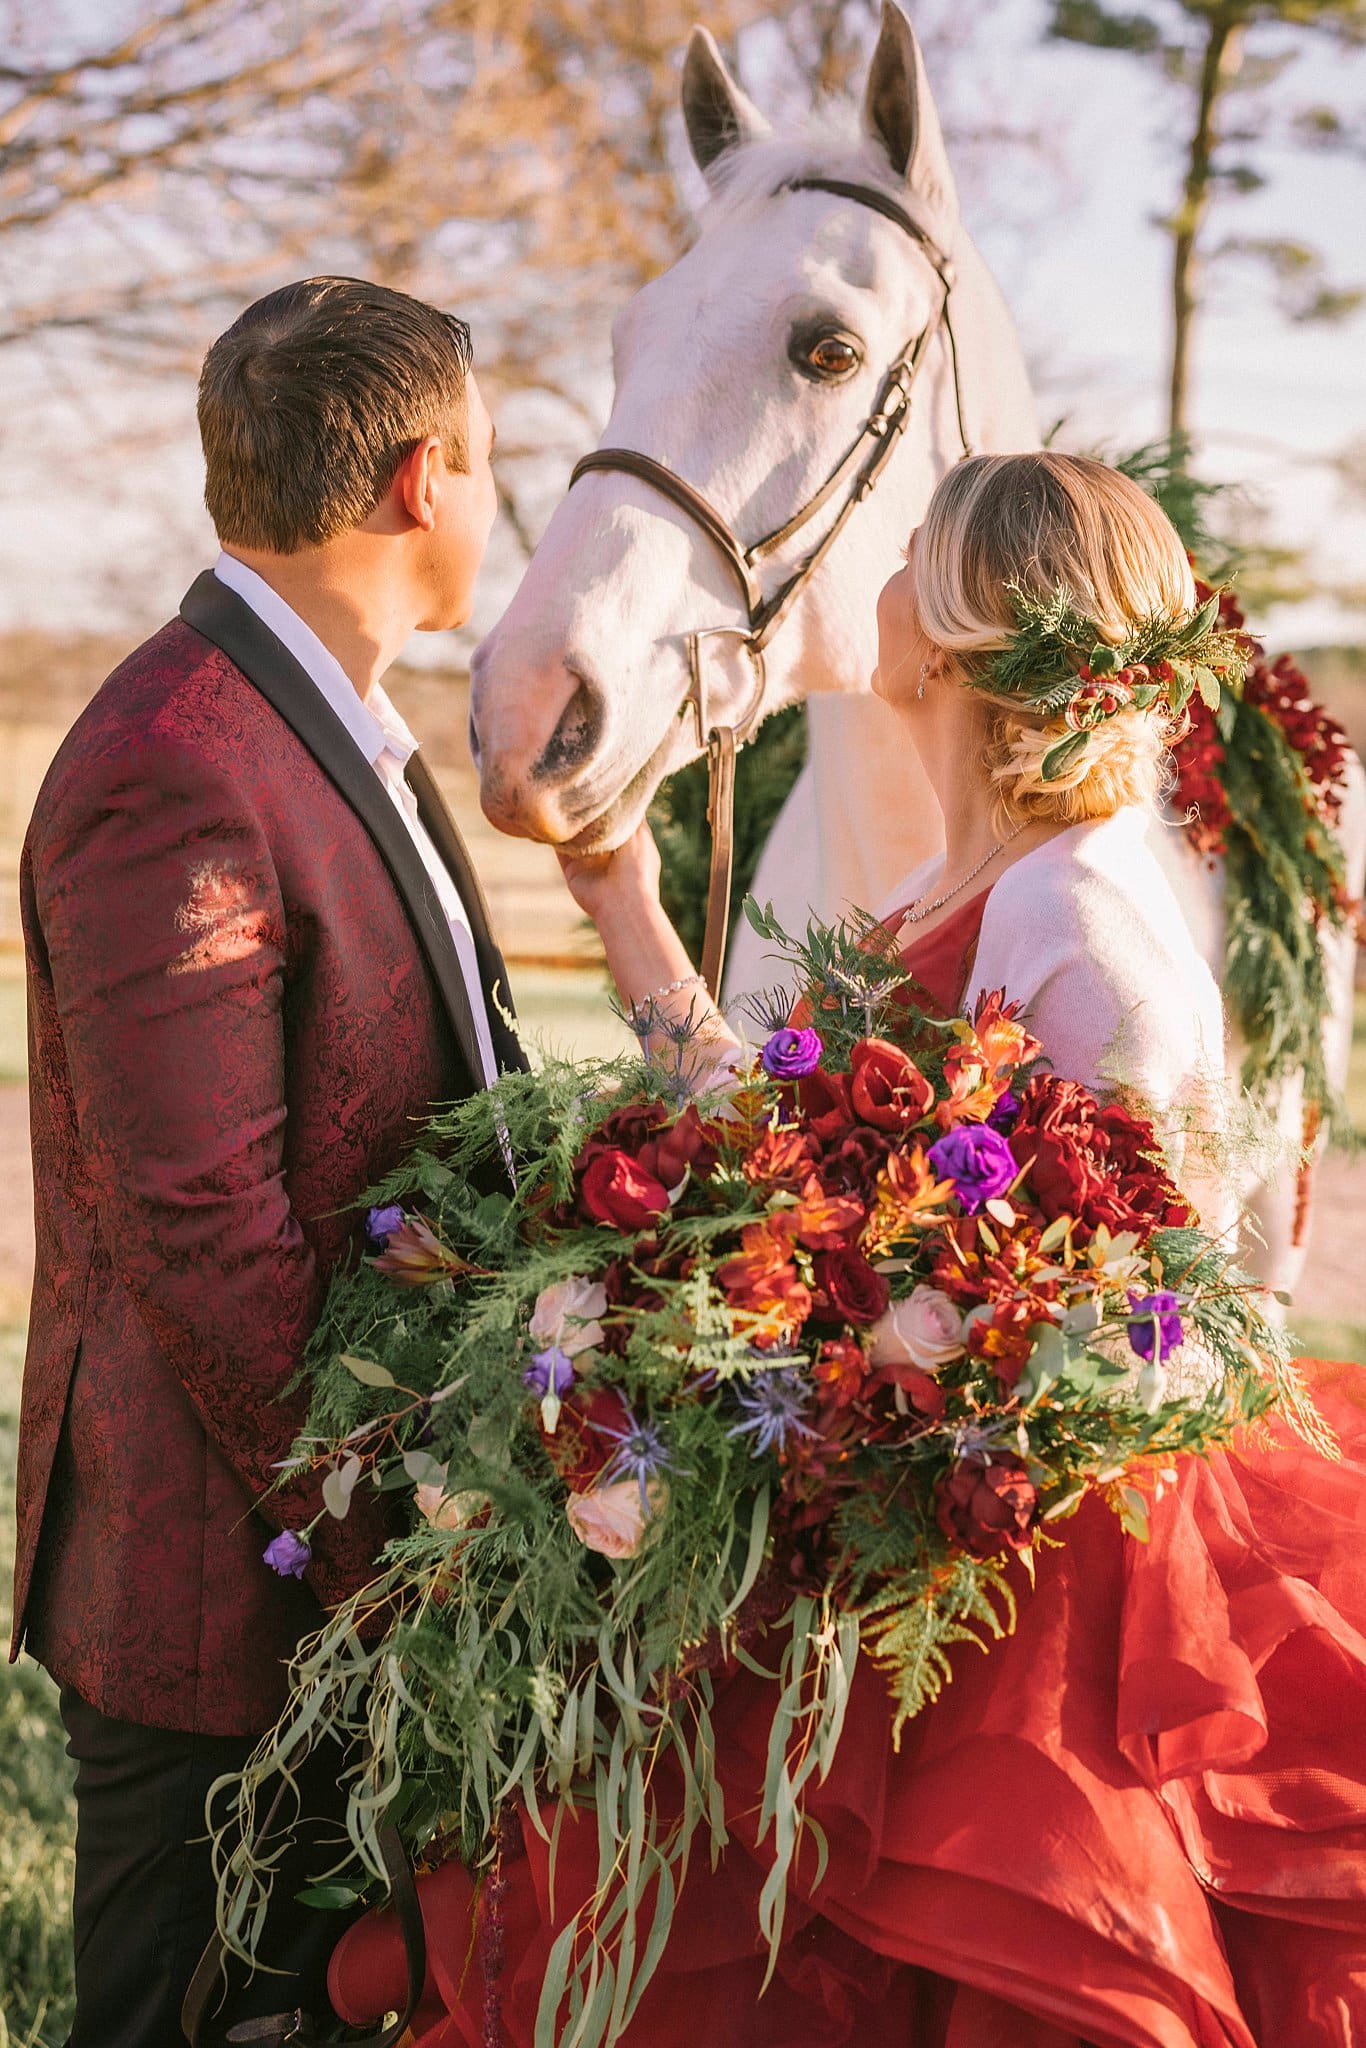 Couple with Horse at a Christmas Wedding